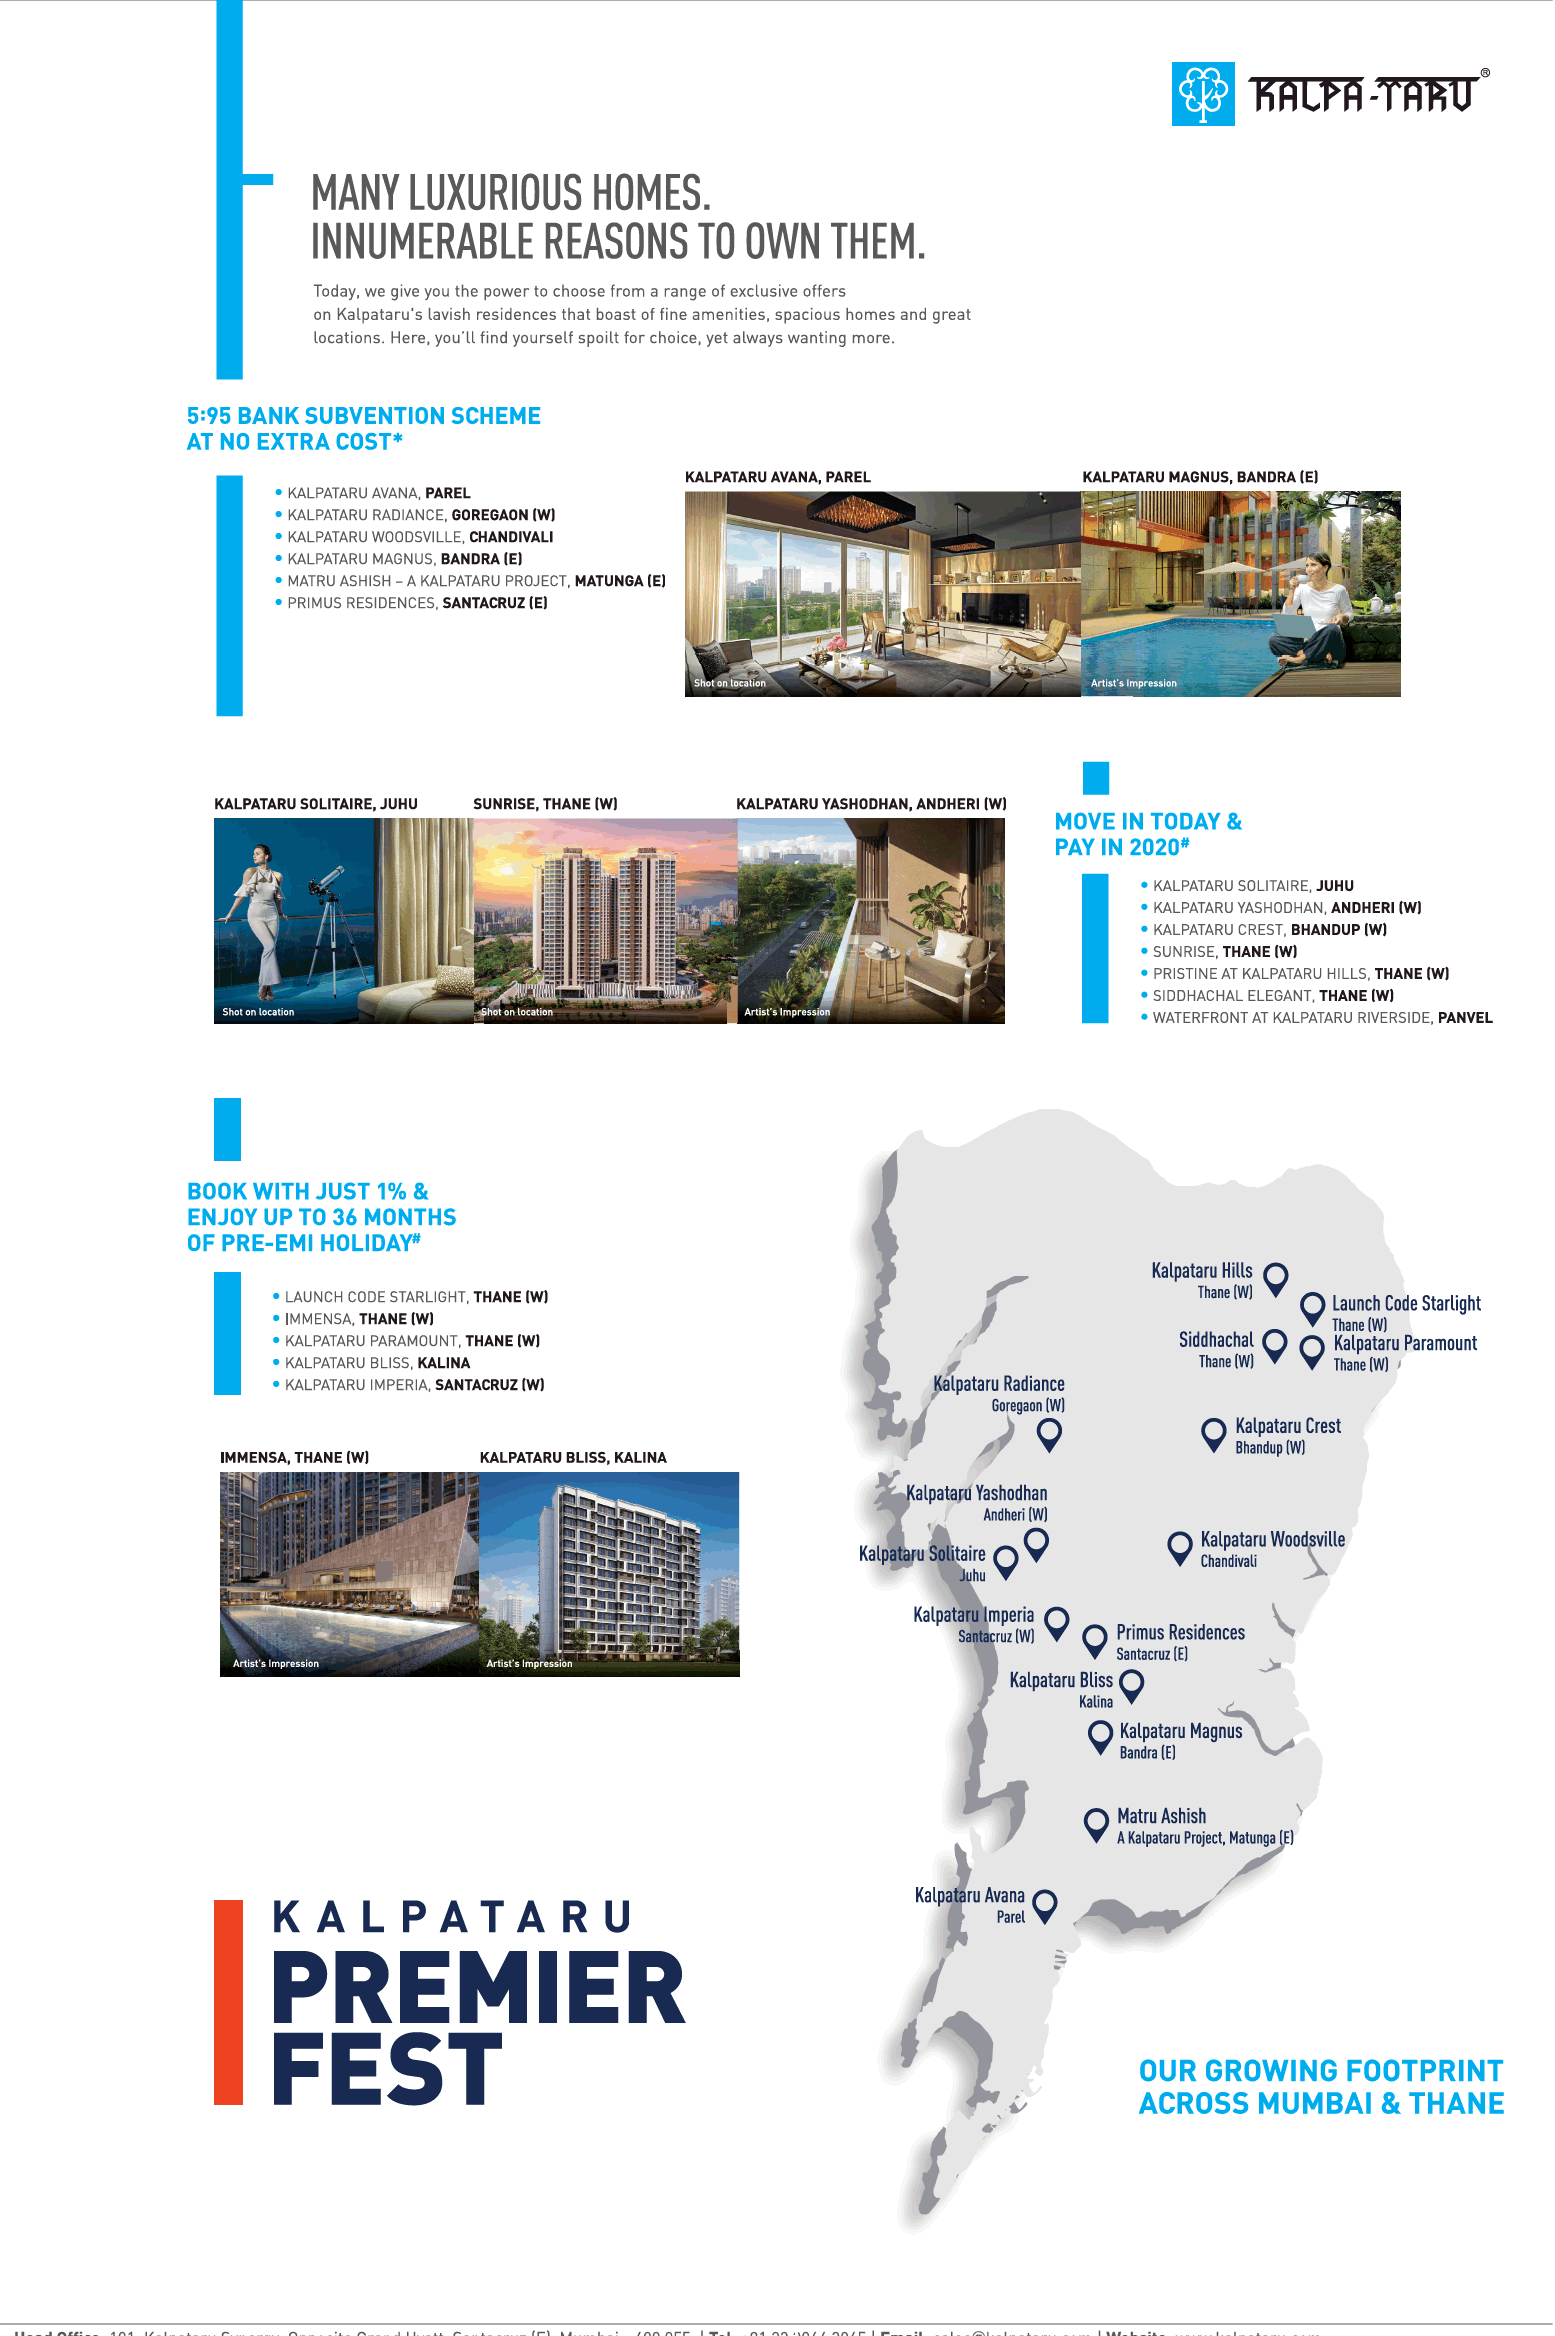 Presenting many luxurious homes and gives innumerable reasons to own them at Kalpataru, Noida Update